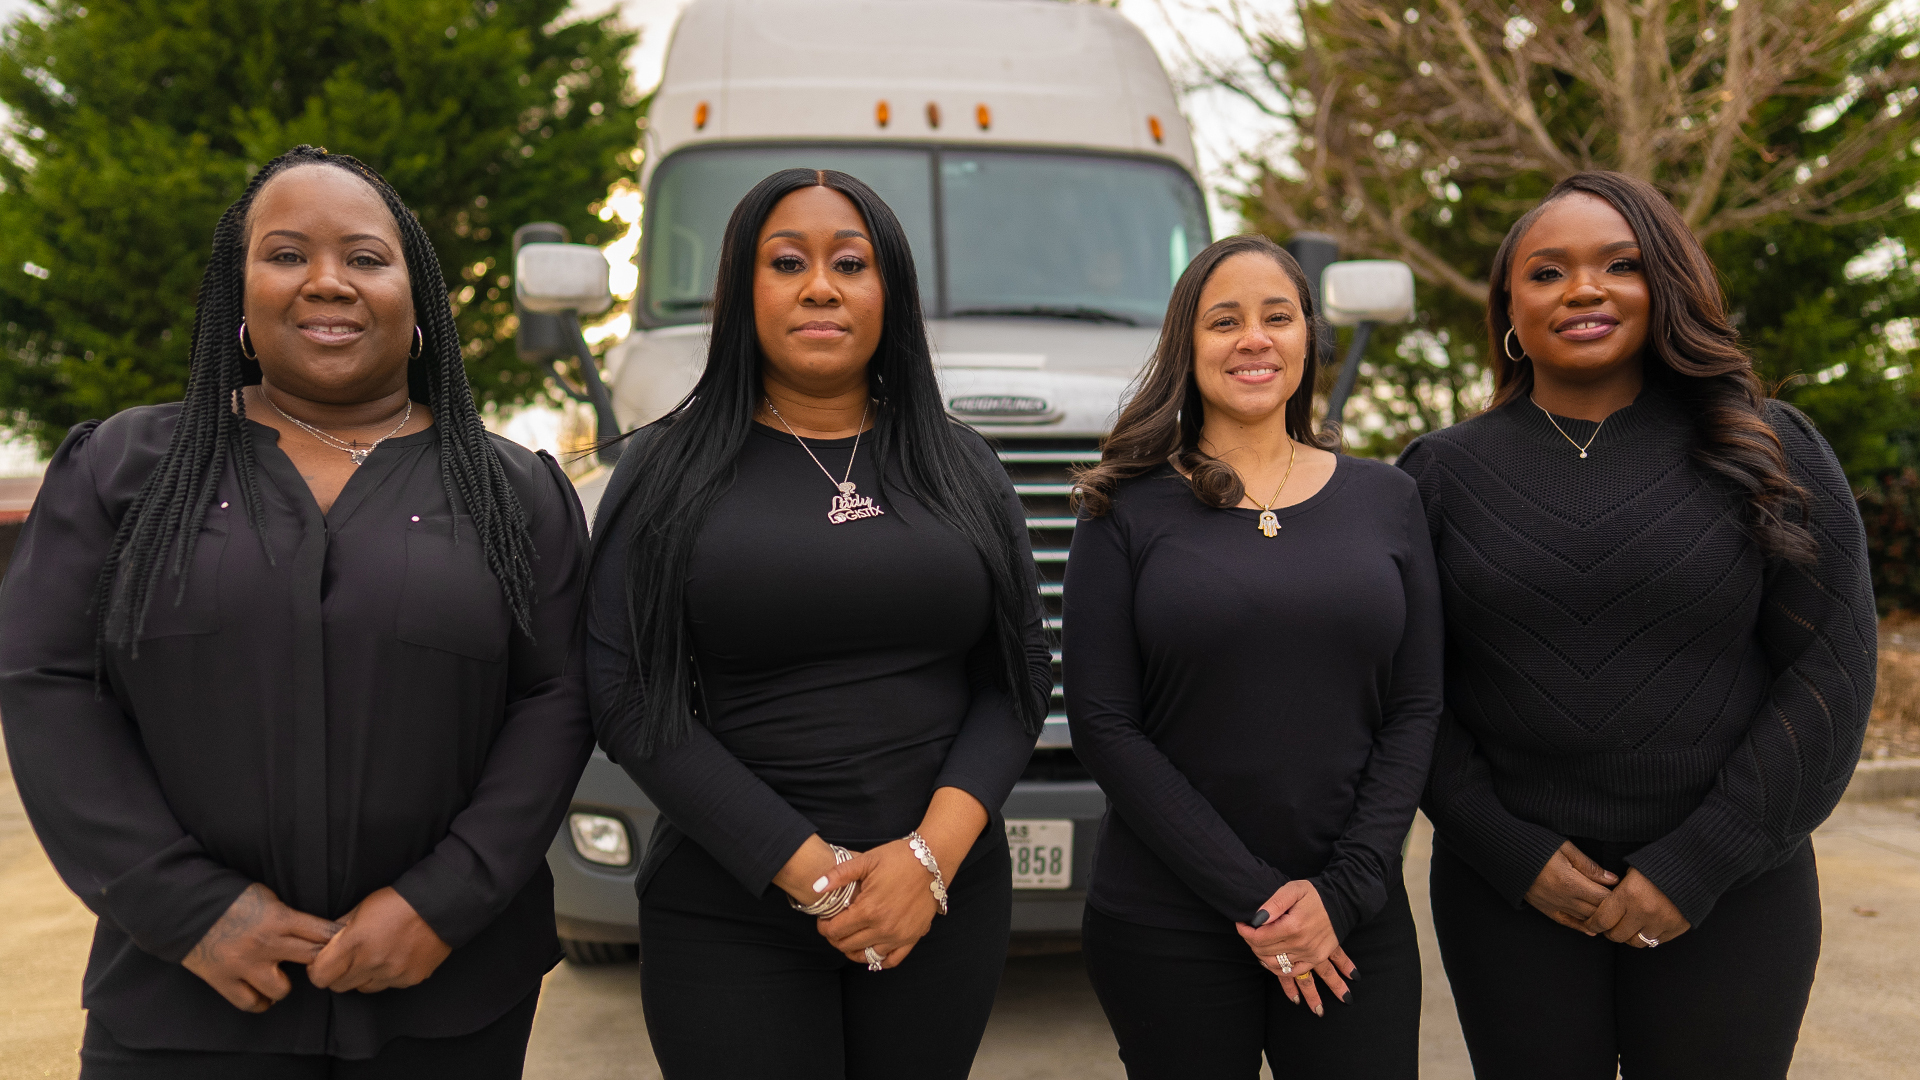 The Leading Ladies Of Logistix Are On A Mission To Help Women Excel In The $800B Trucking Industry